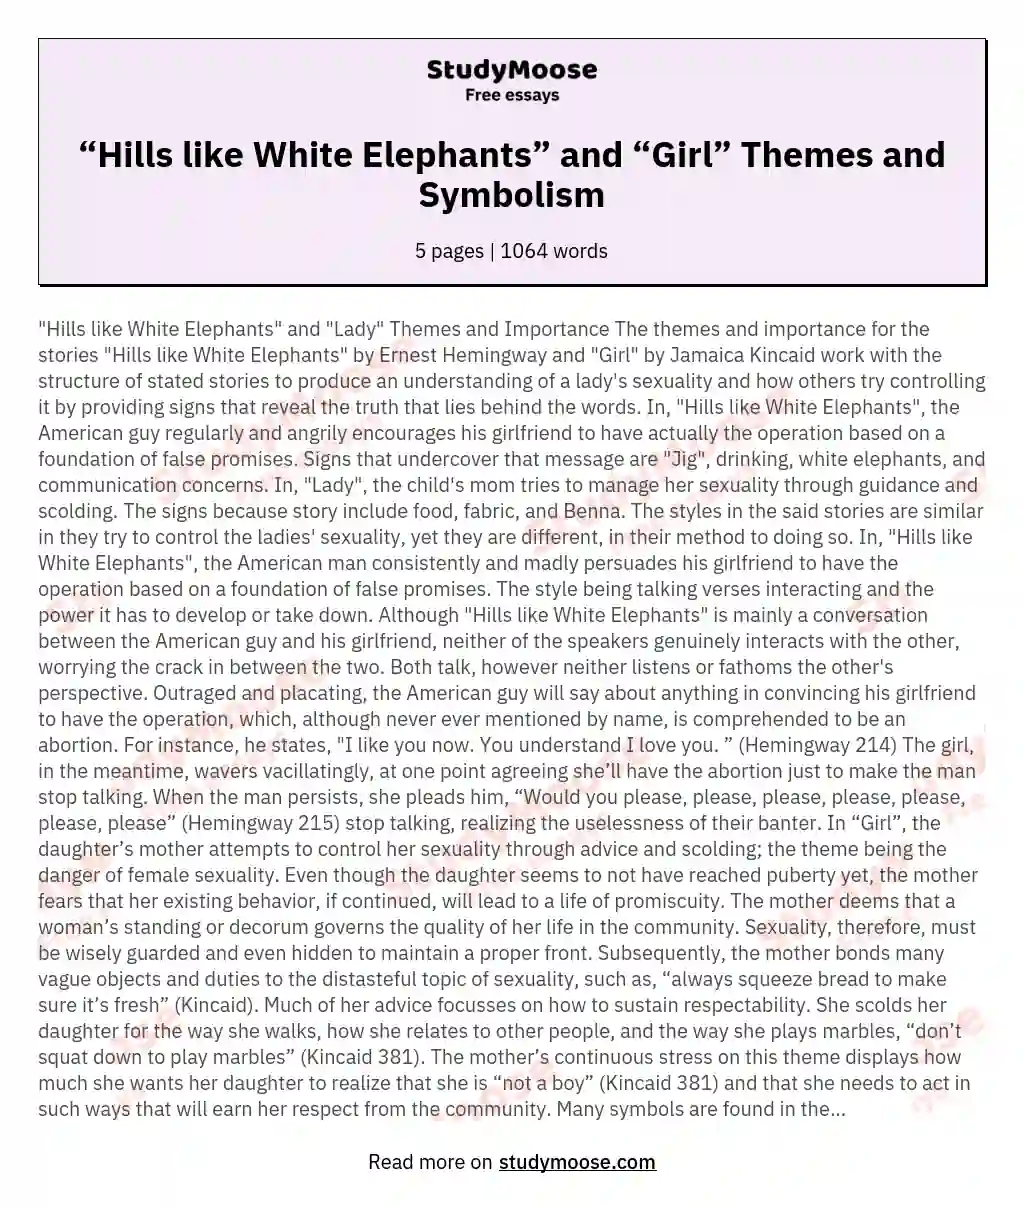 “Hills like White Elephants” and “Girl” Themes and Symbolism essay